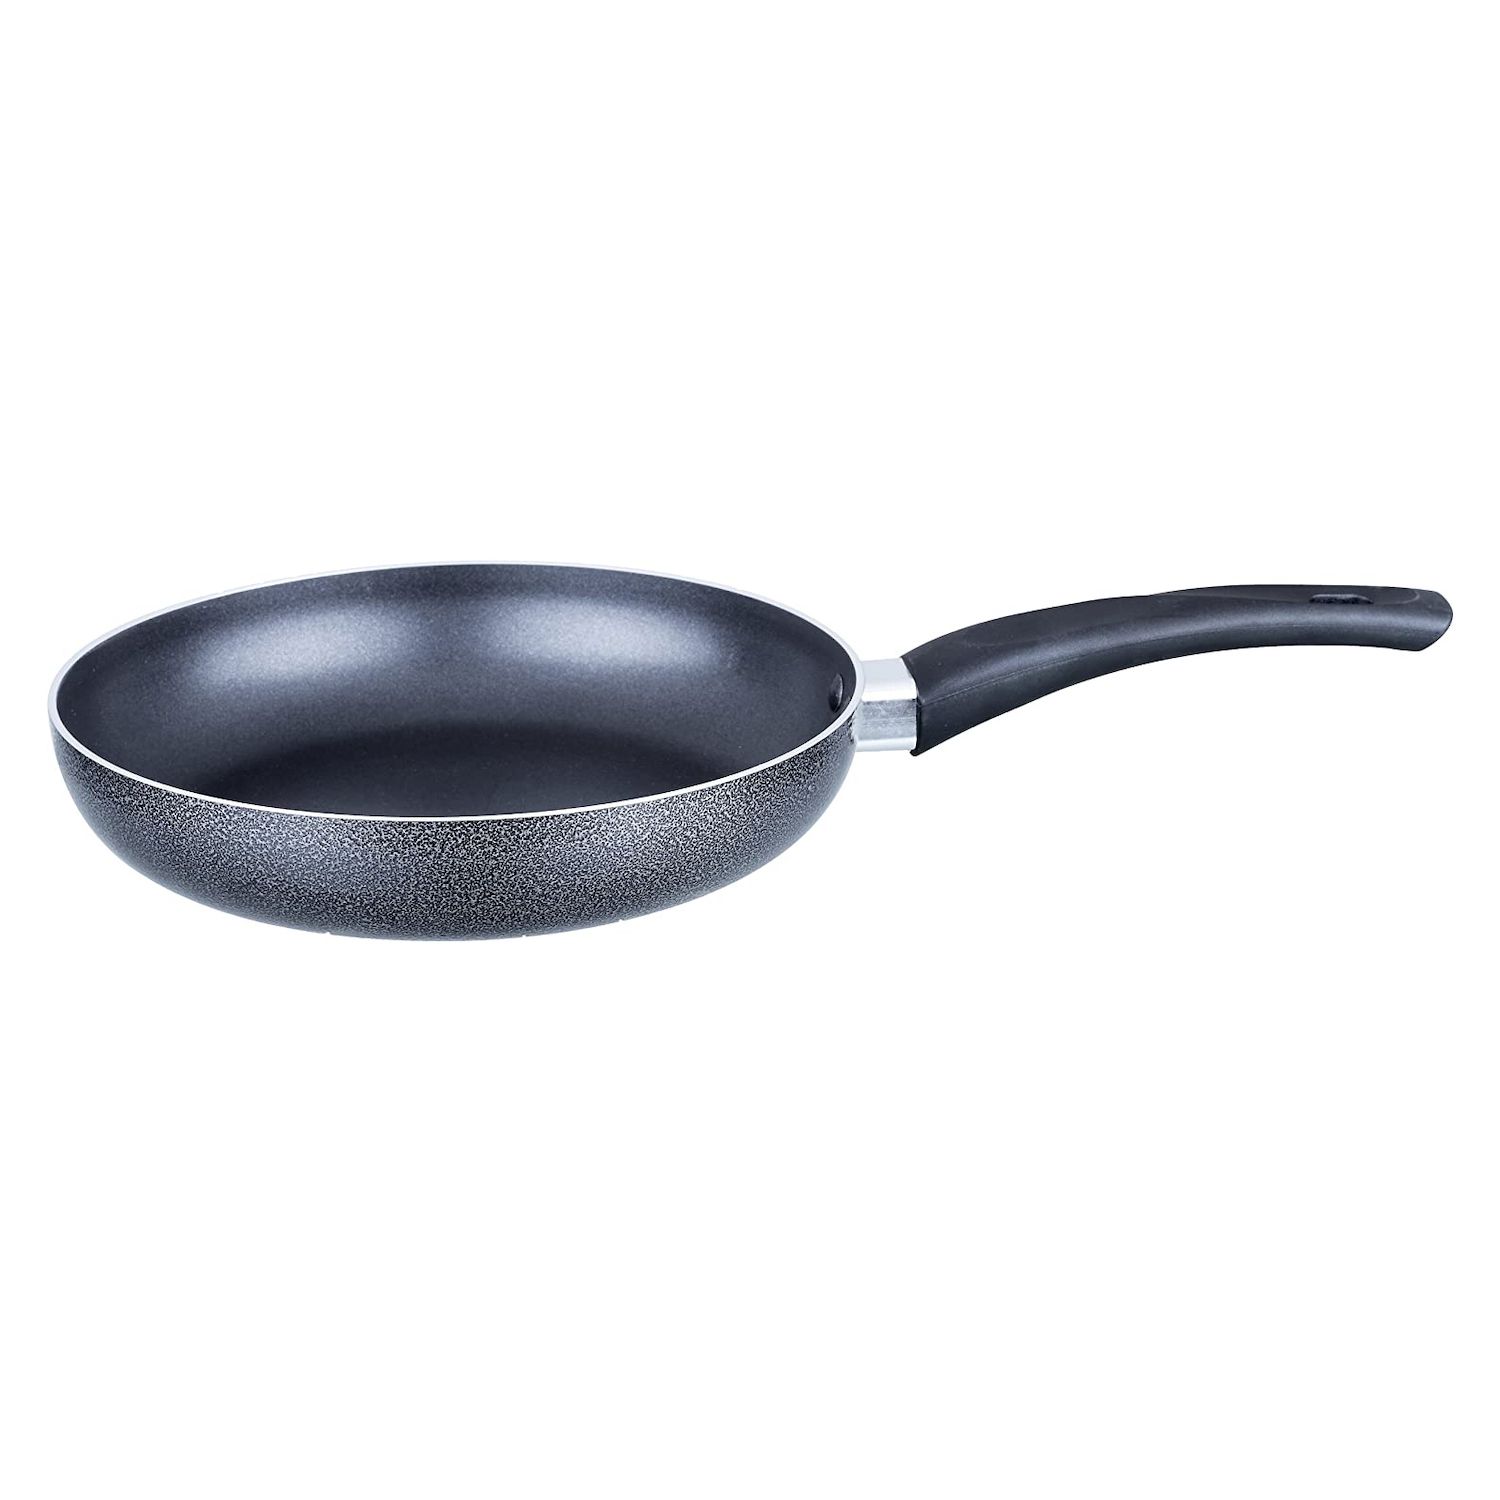 Brentwood Appliances SK-46 8-Inch Nonstick Electric Skillet with Glass Lid